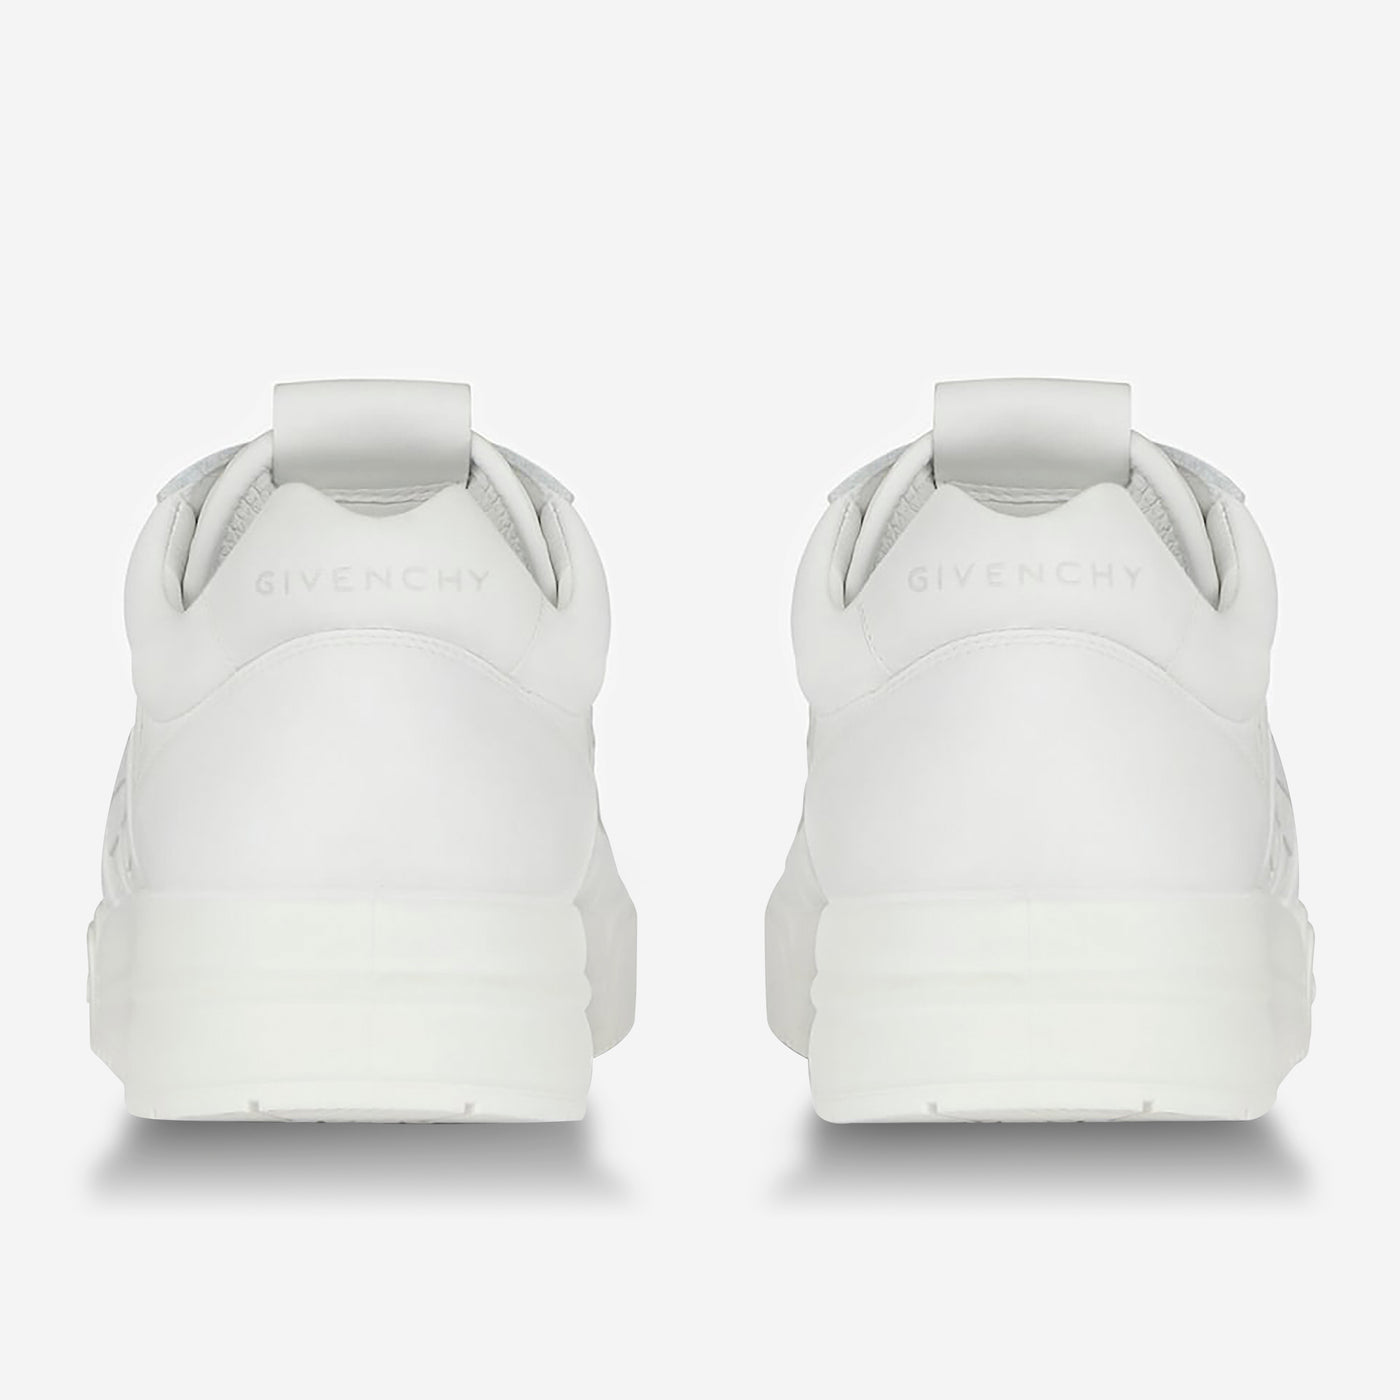 Givenchy G4 Low Sneakers